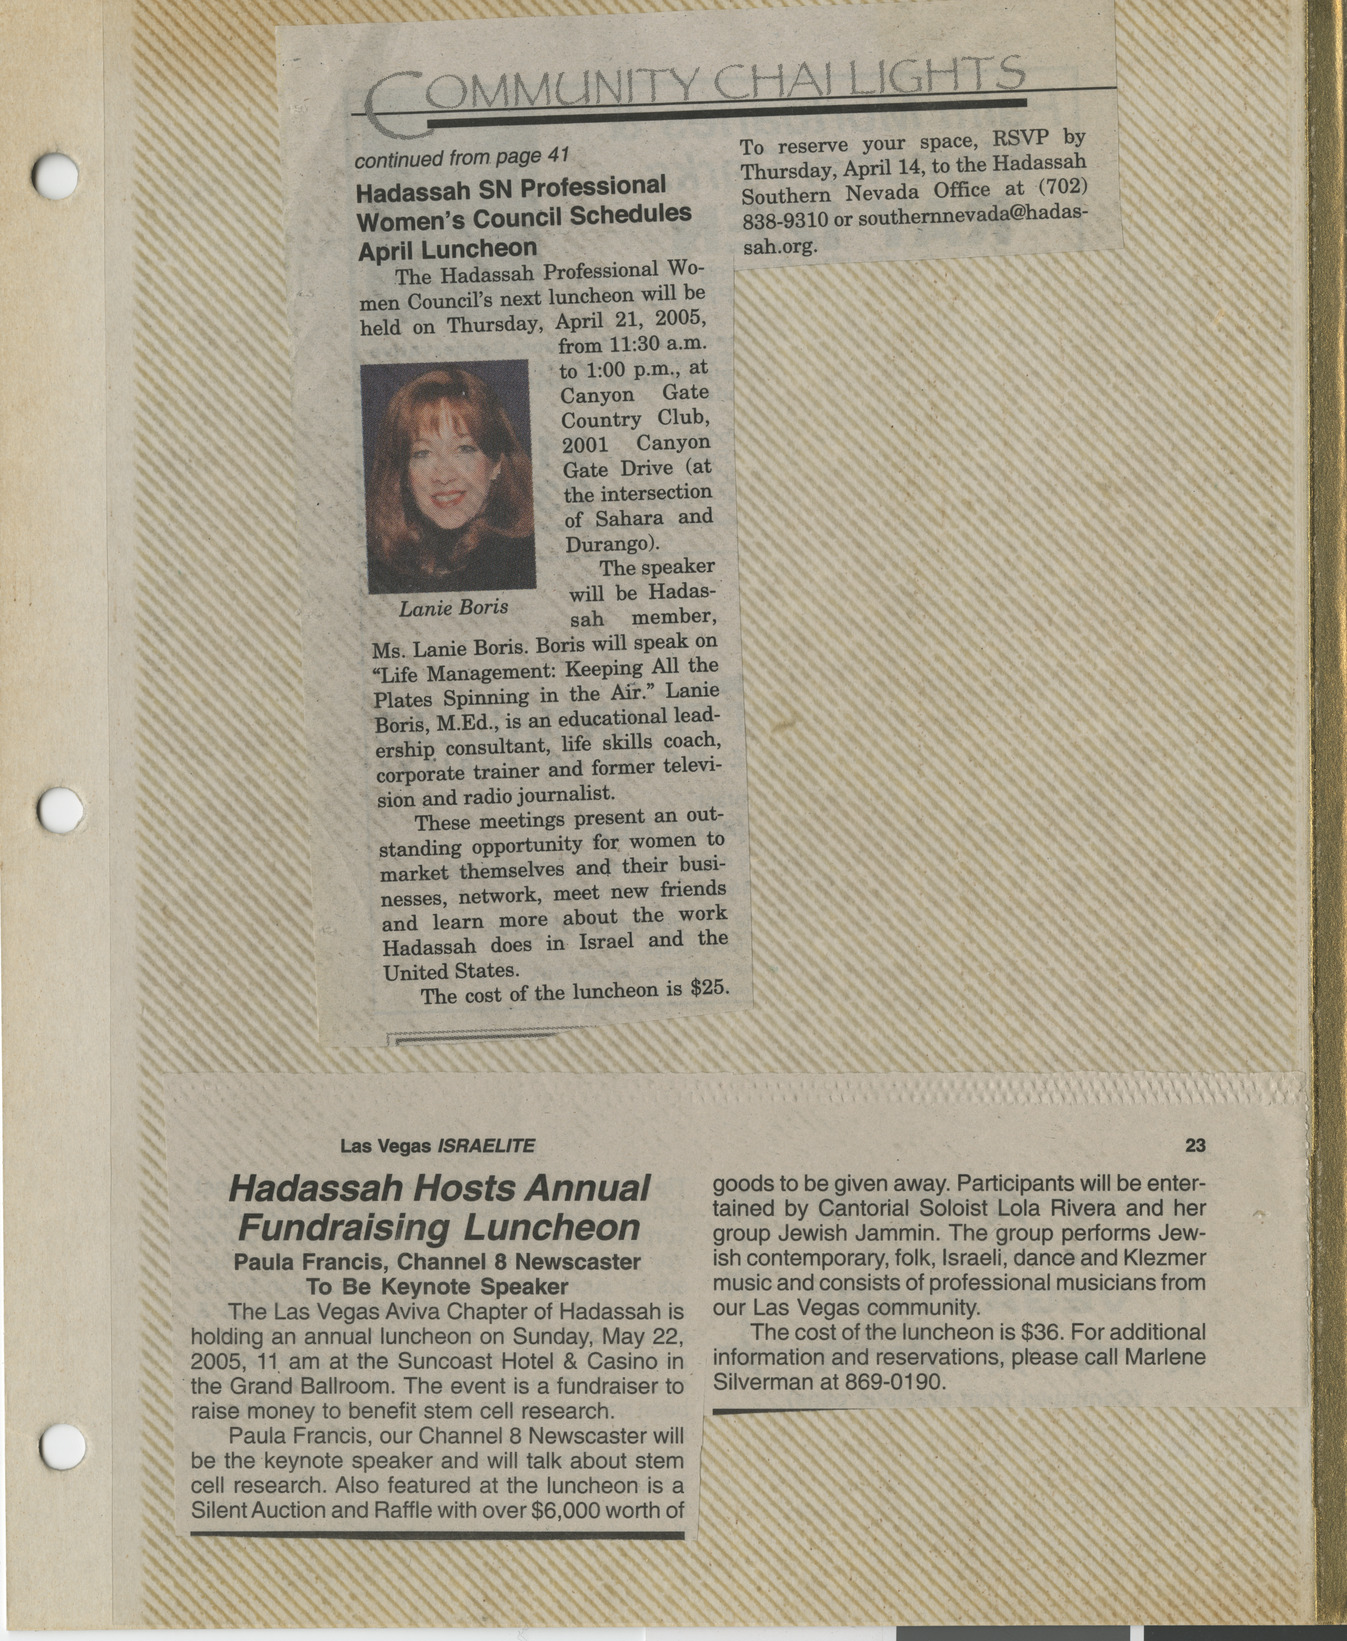 Newspaper clippings about Hadassah luncheons